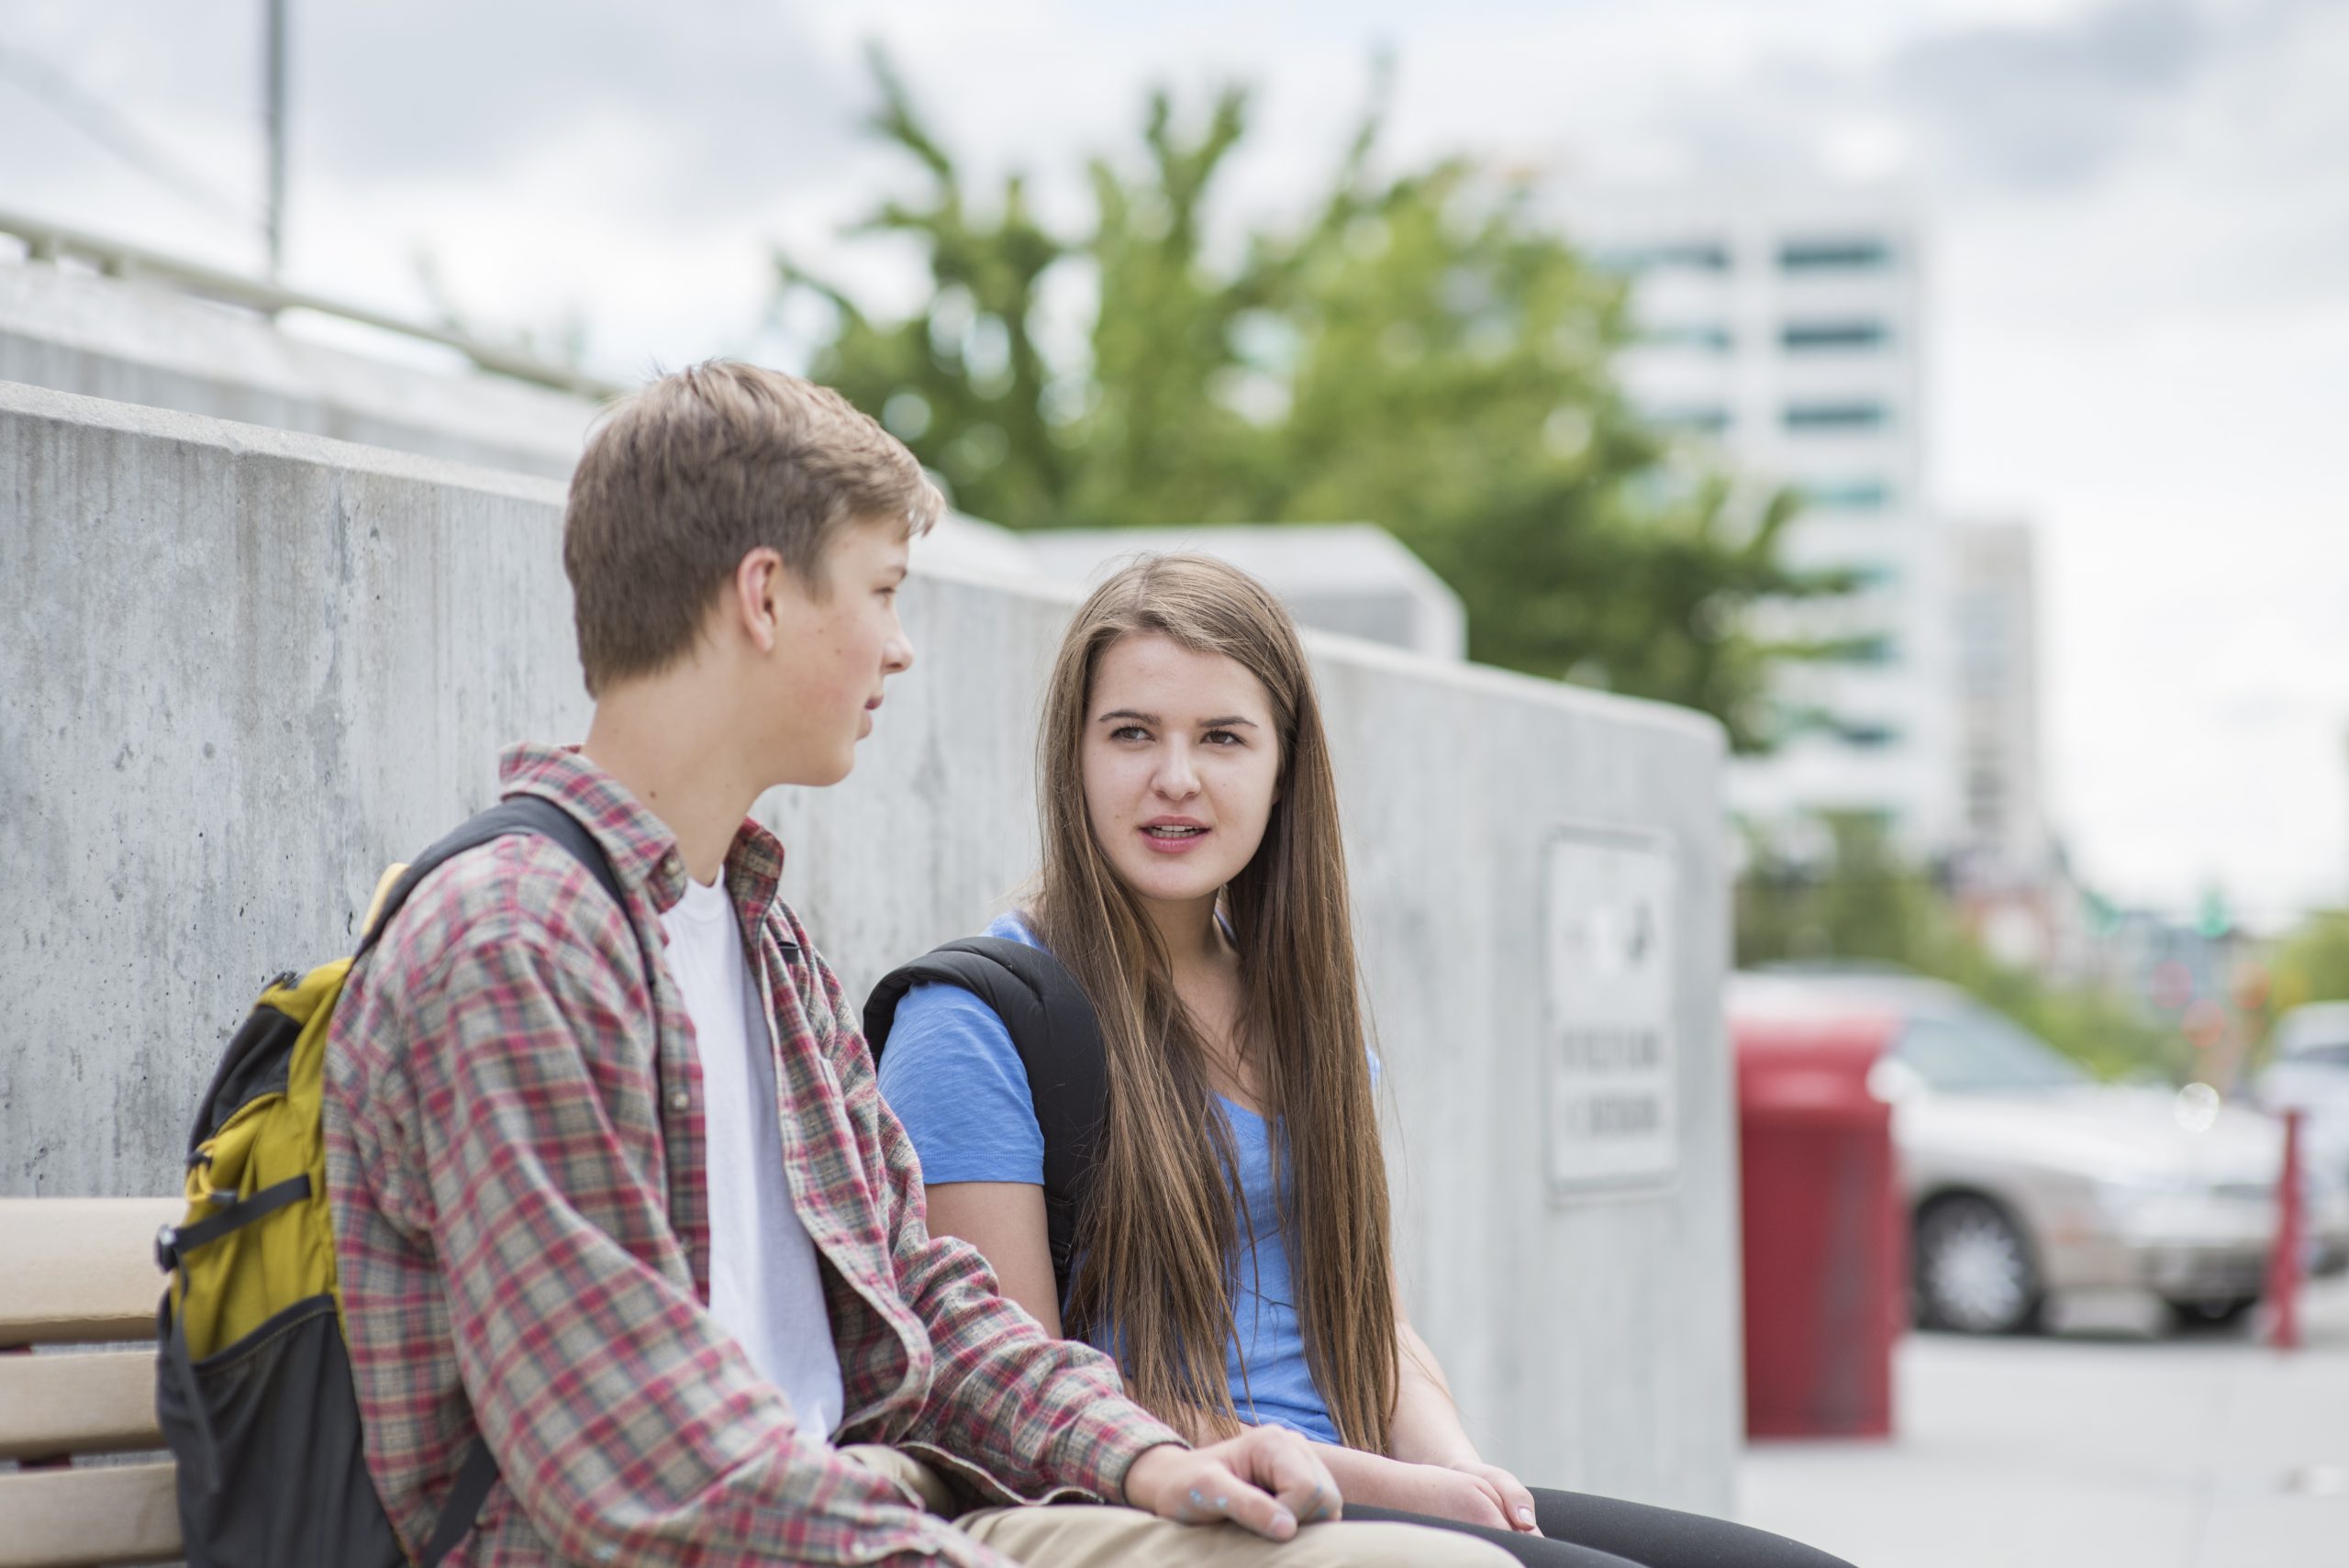 Two students sitting on a bench outside on campus talking.